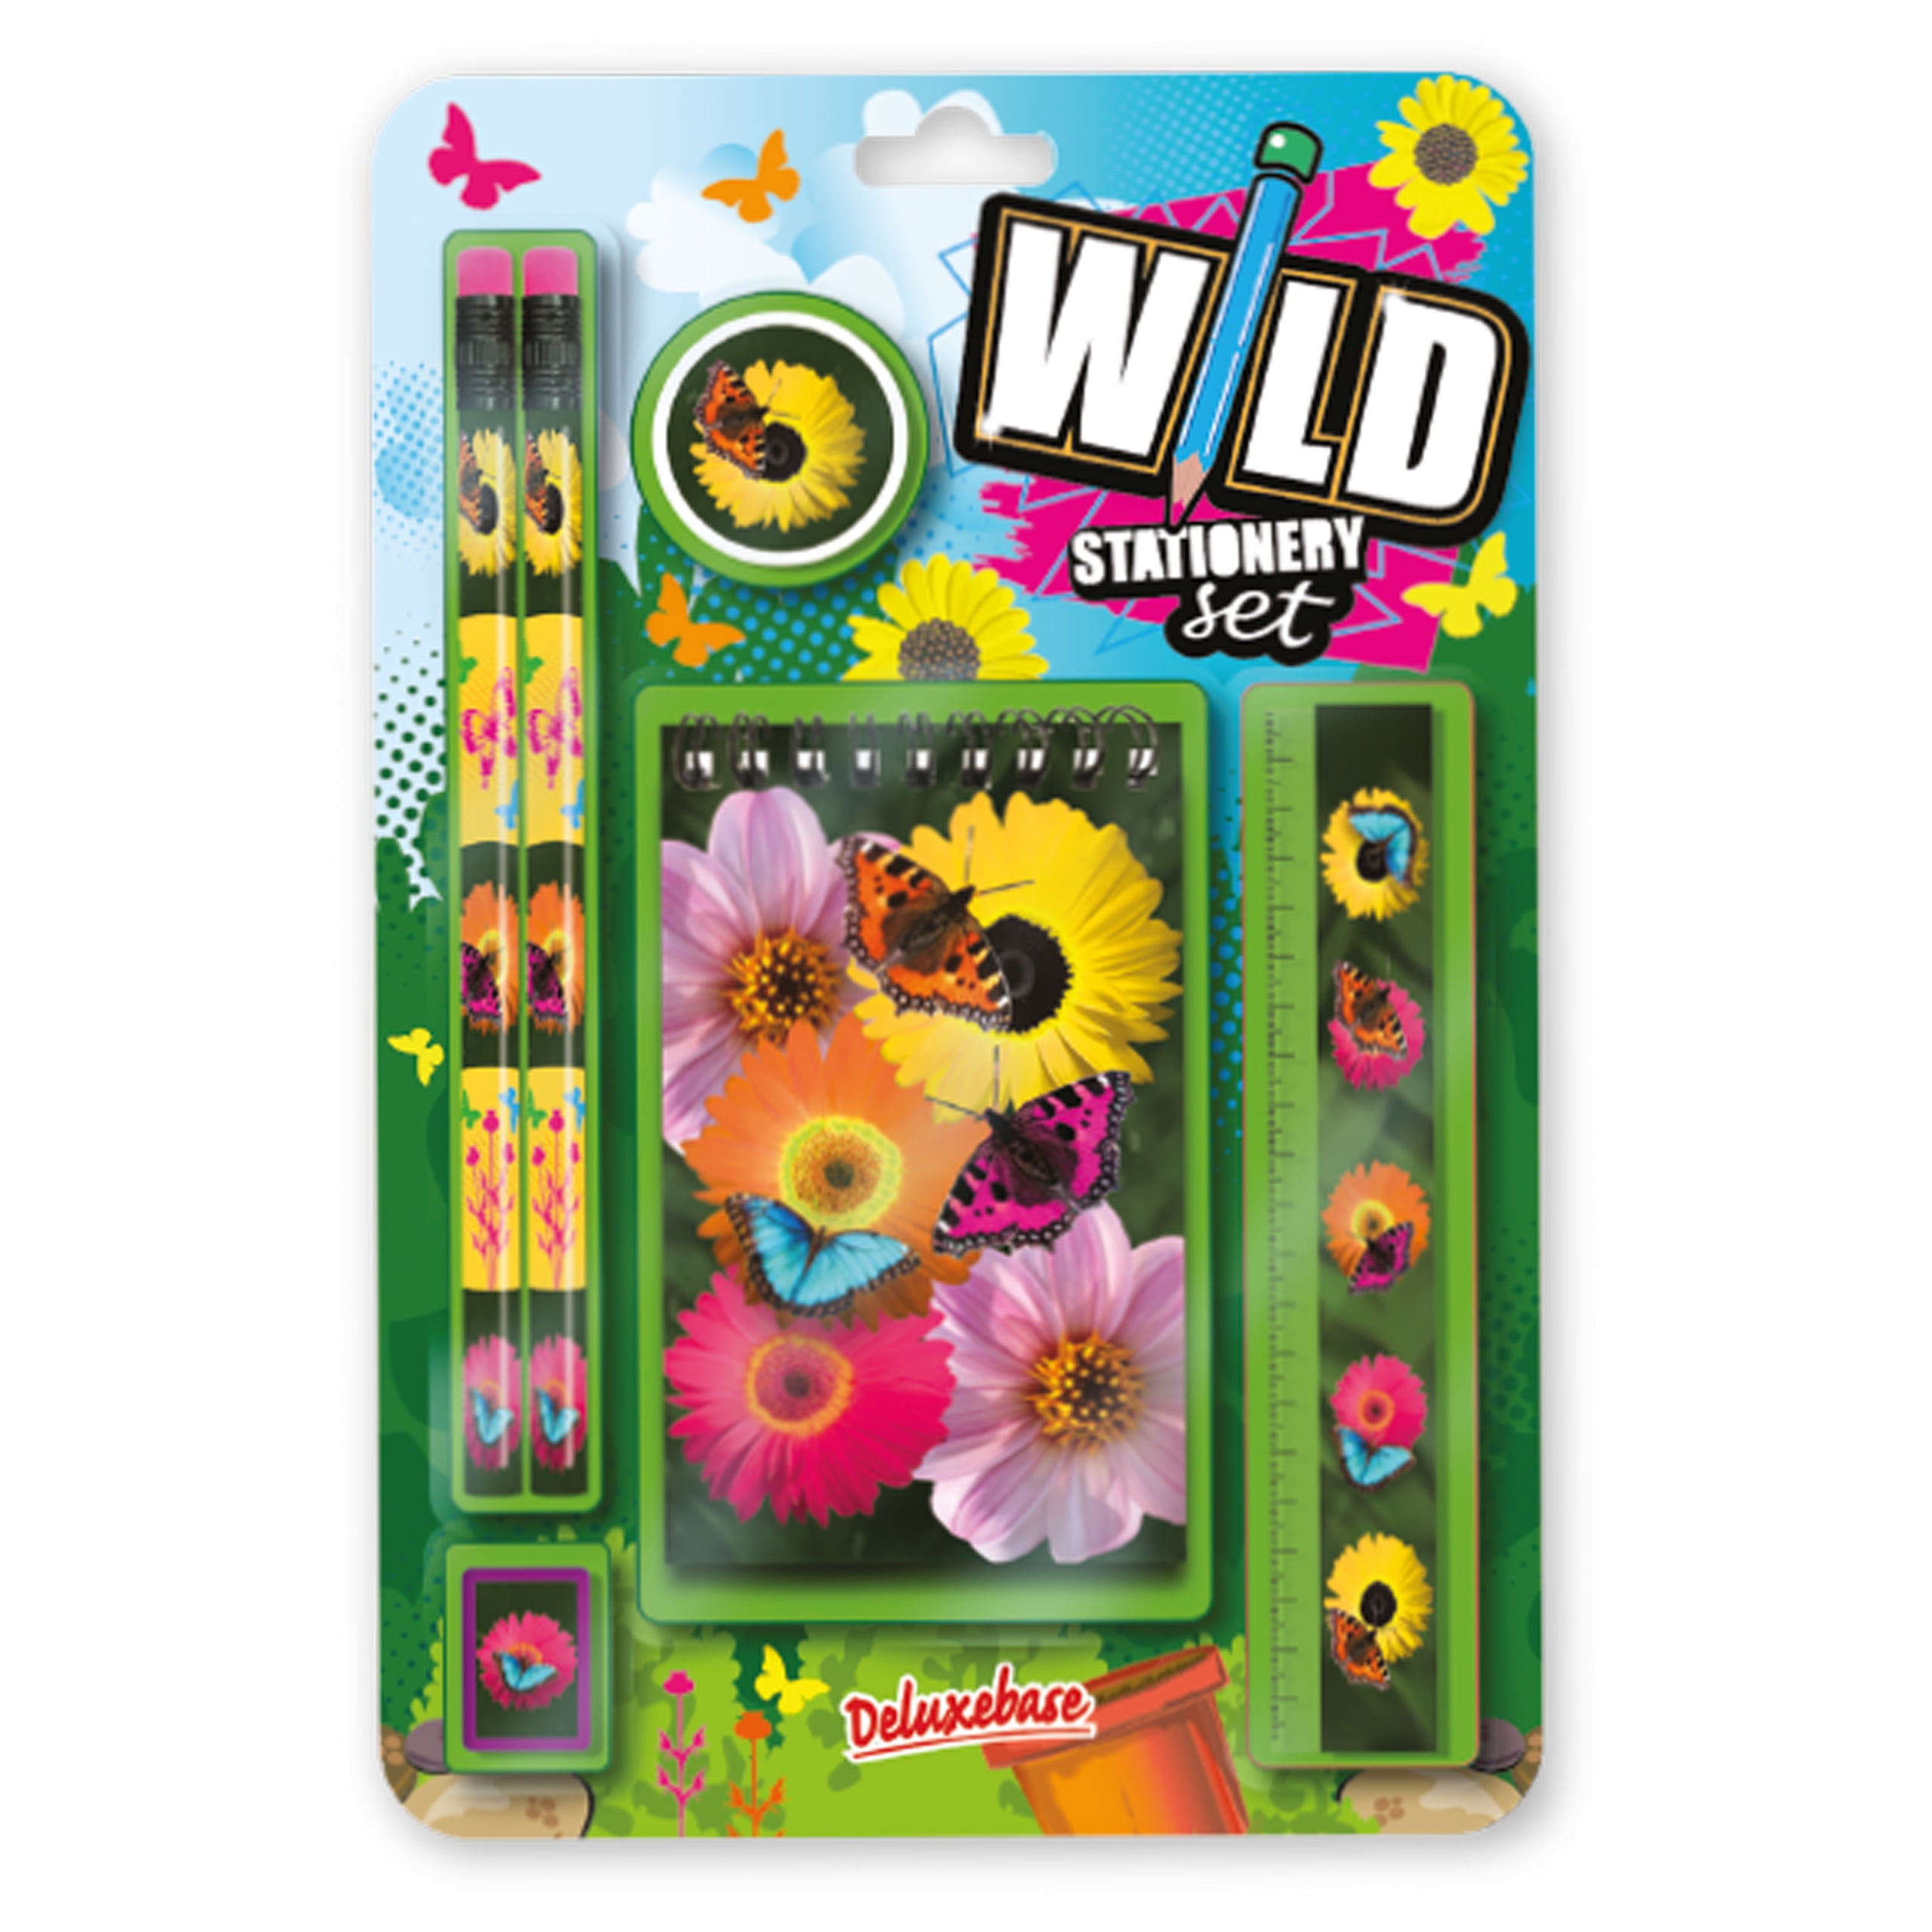 Wild Stationery Set - Butterfly School Stationary Sets from Deluxebase.  School Supplies Include 2 Pencils, Pencil Eraser, Pencil Sharpener, Ruler,  and Cute Notebook. Stationary Supplies Gifts for Kids 